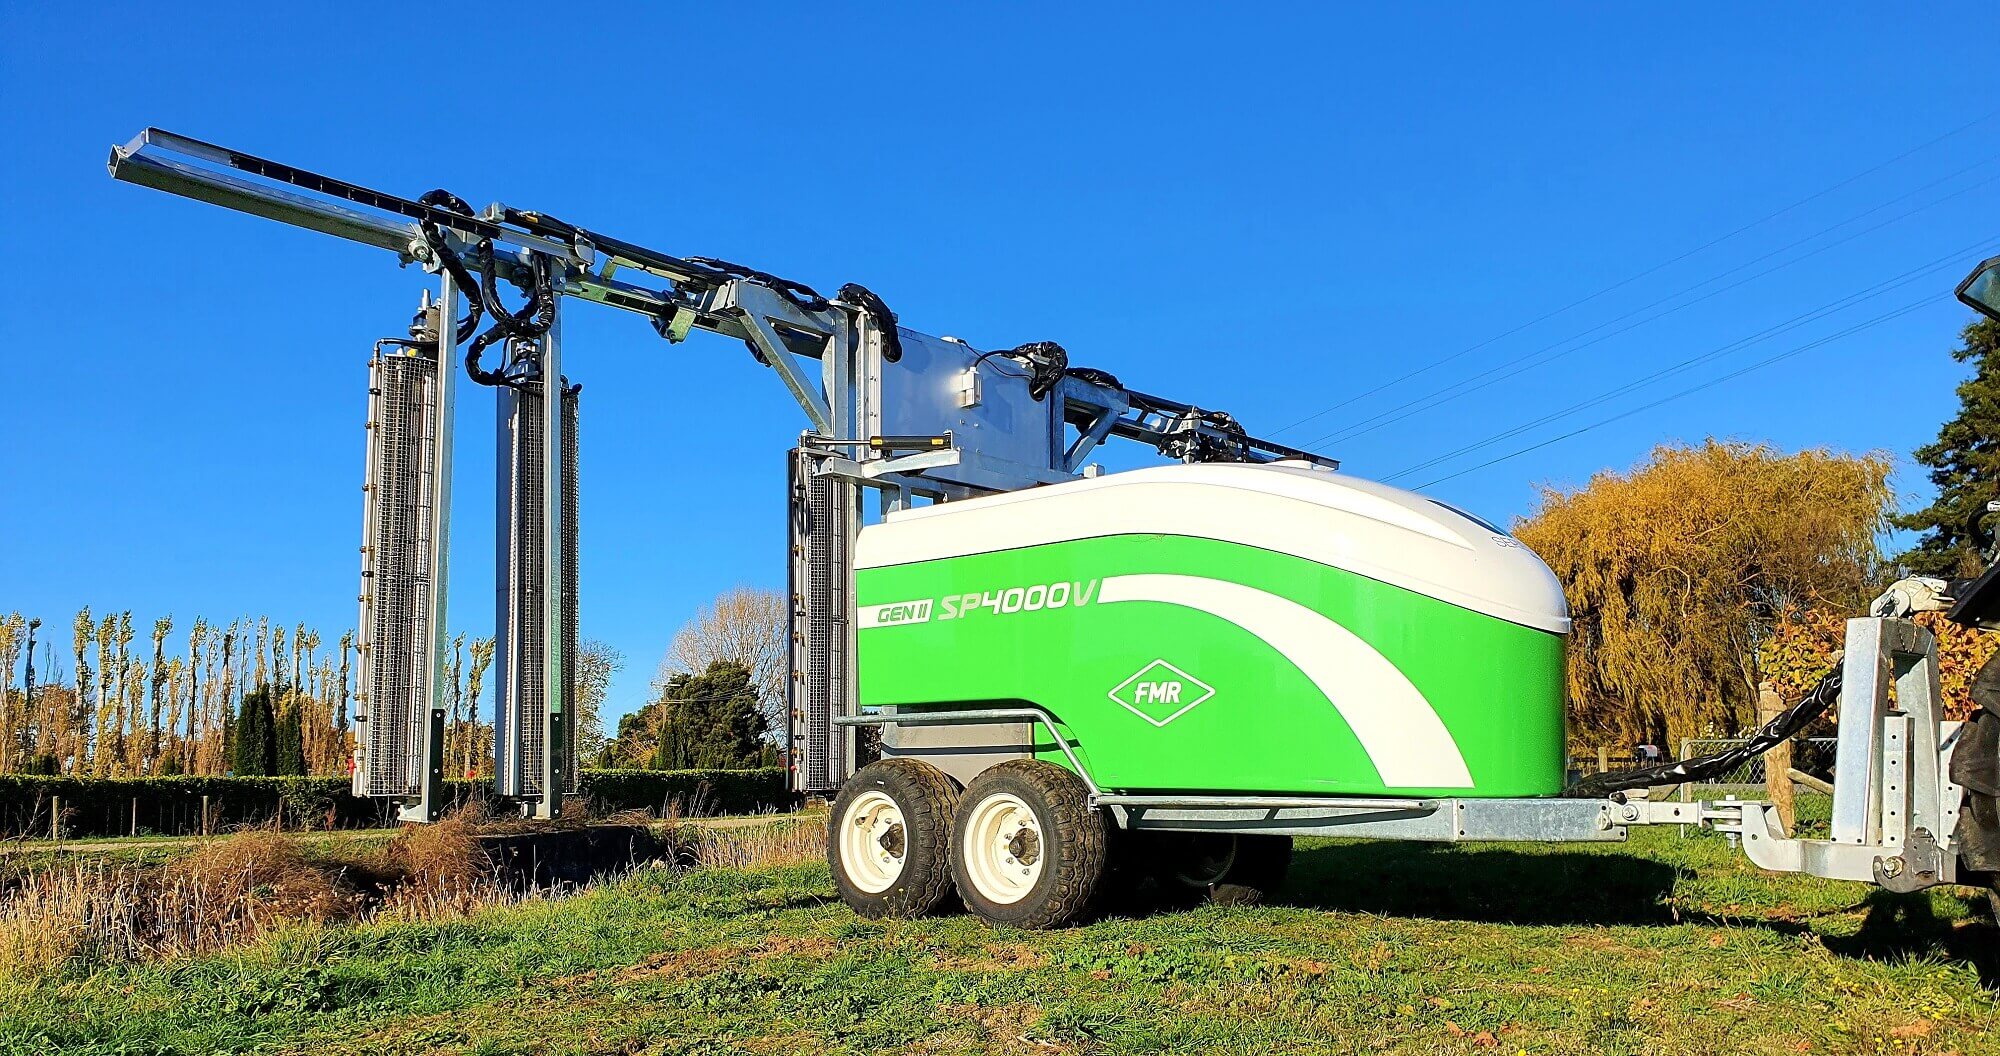 Trailed sprayer for vineyards designed to work over rows for efficient application of crop protection chemicals